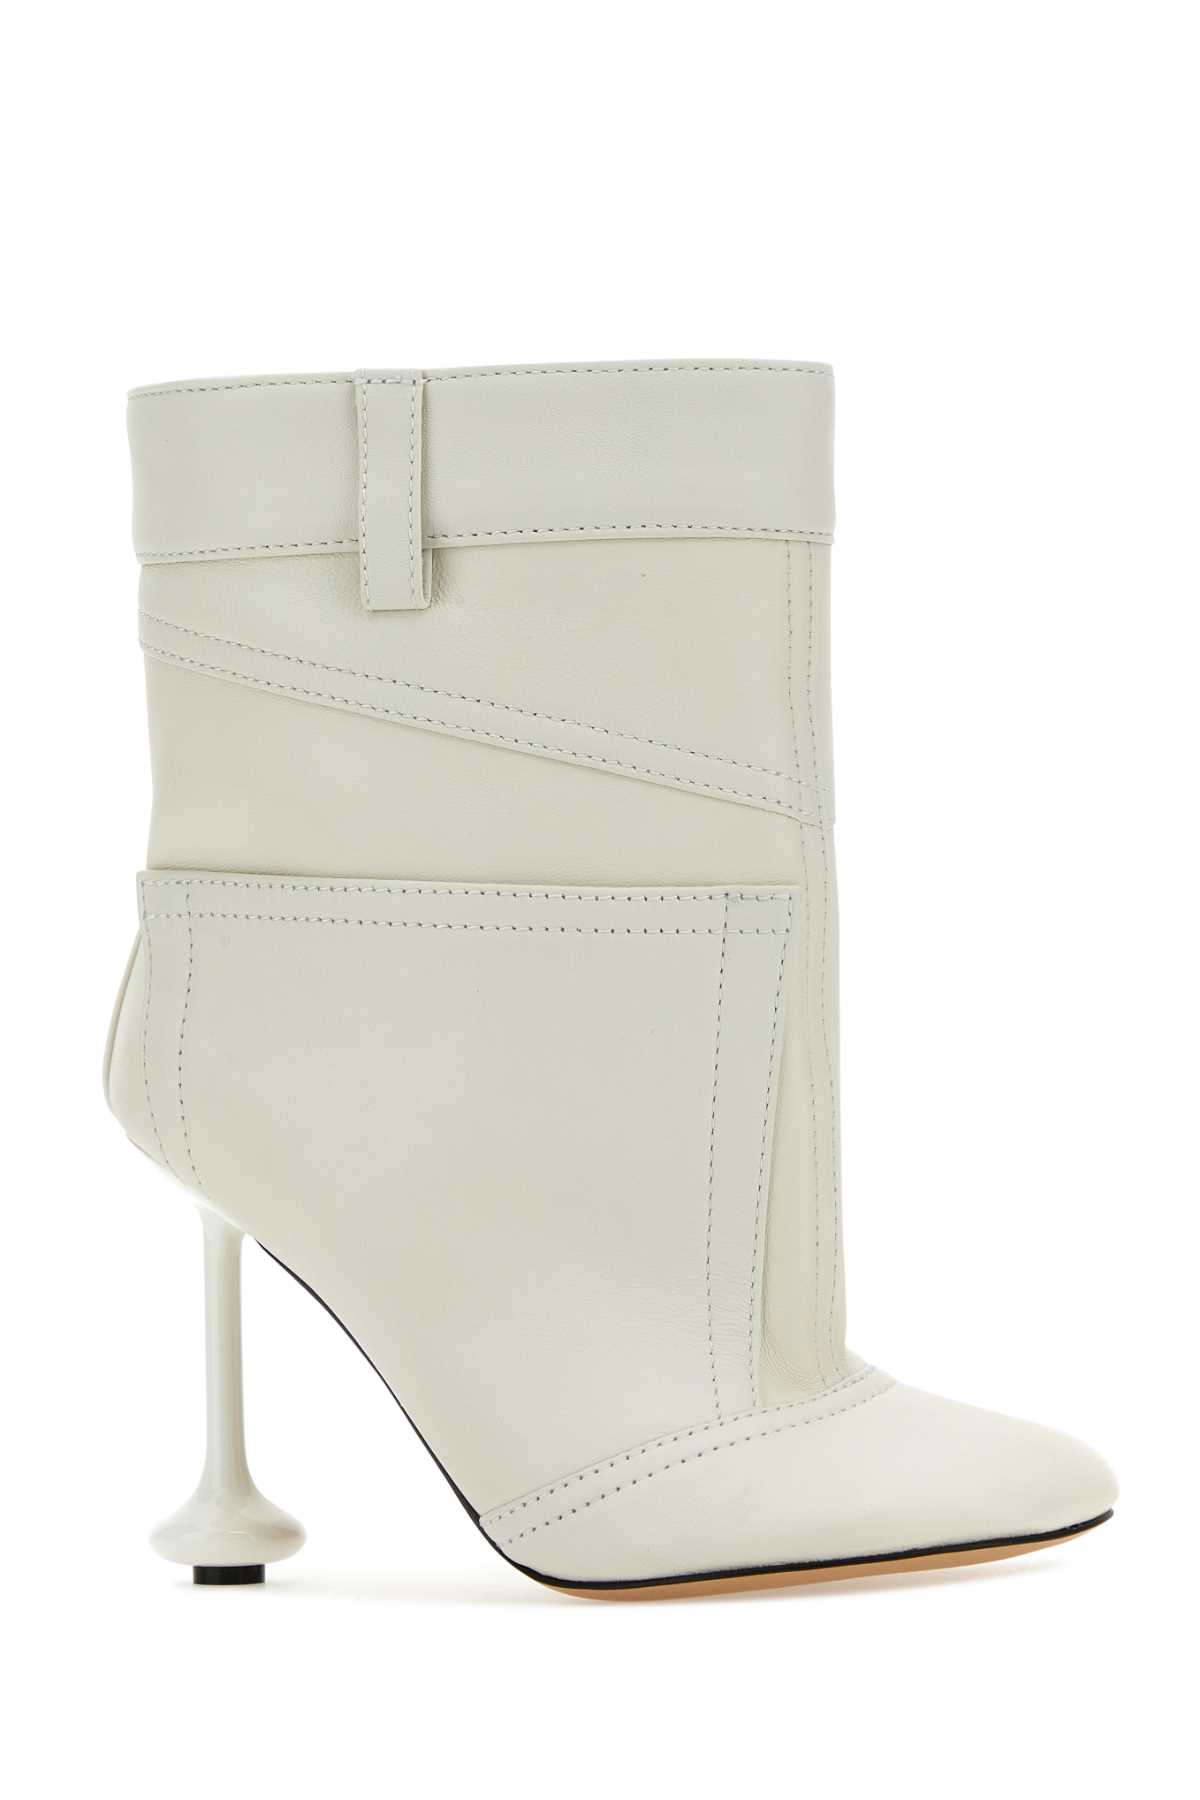 LOEWE IVORY NAPPA LEATHER TOY ANKLE BOOTS